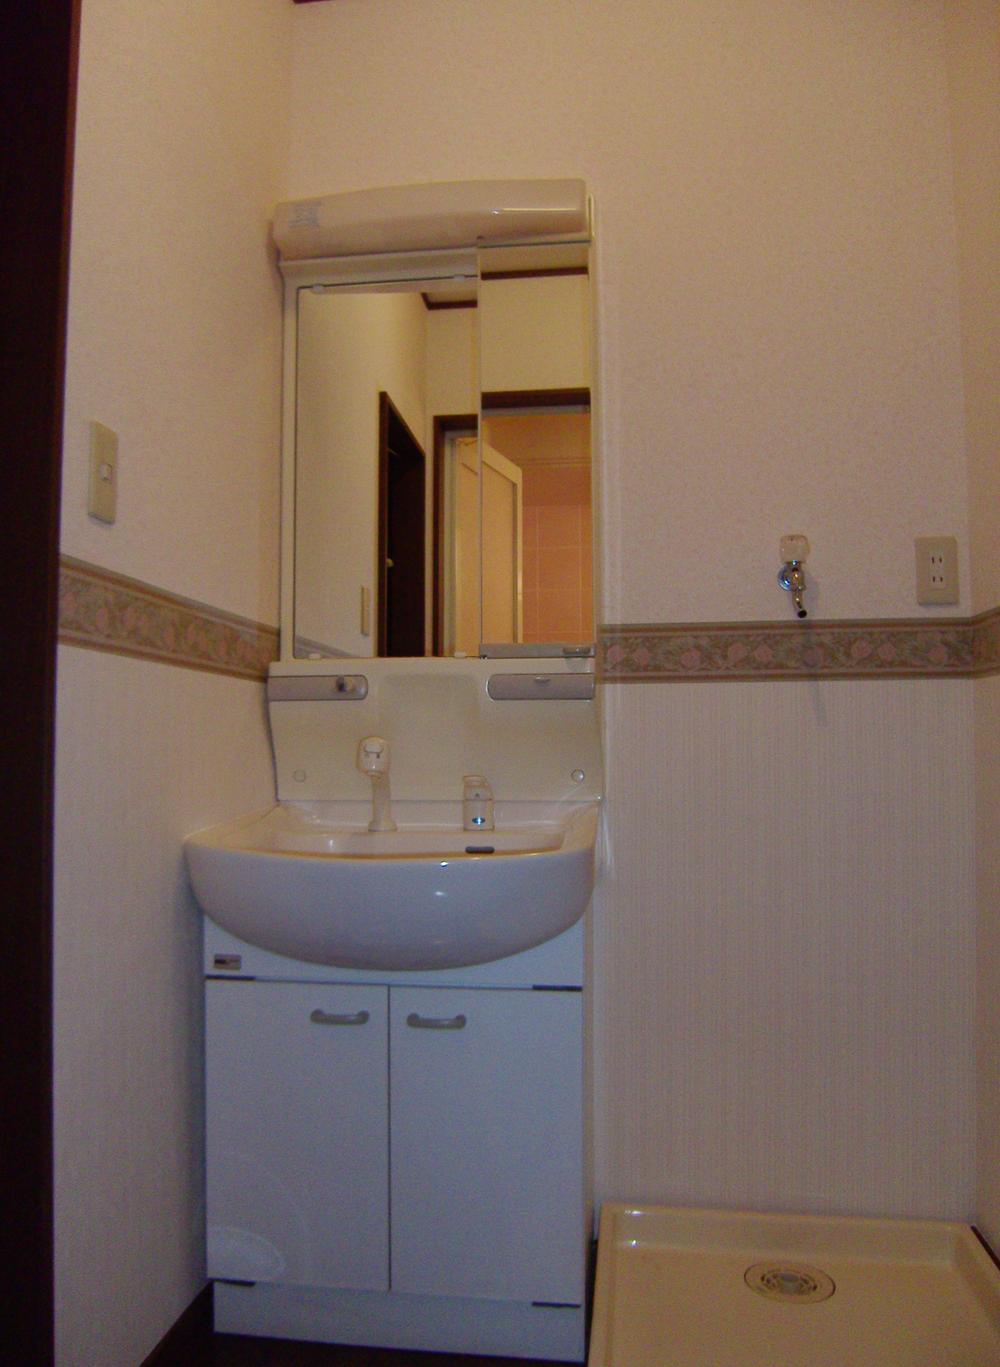 Wash basin, toilet. Vanity is equipped with a two-sided mirror